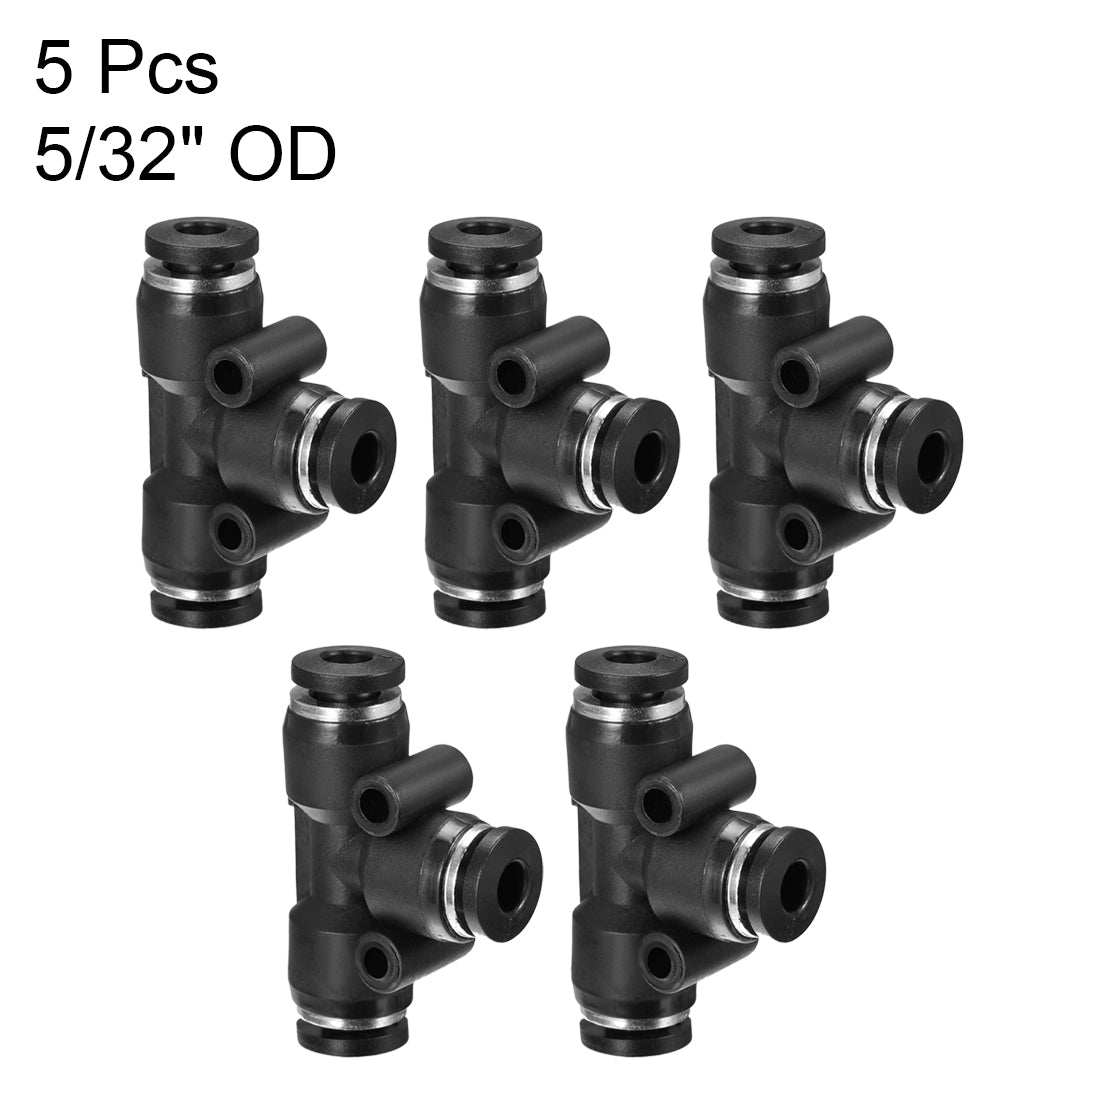 uxcell Uxcell 5 pcs Push To Connect Fittings T Type Tube Connect 4 mm or 5/32" od Push Fit Fittings Tube Fittings Push Lock (4mm T tee)